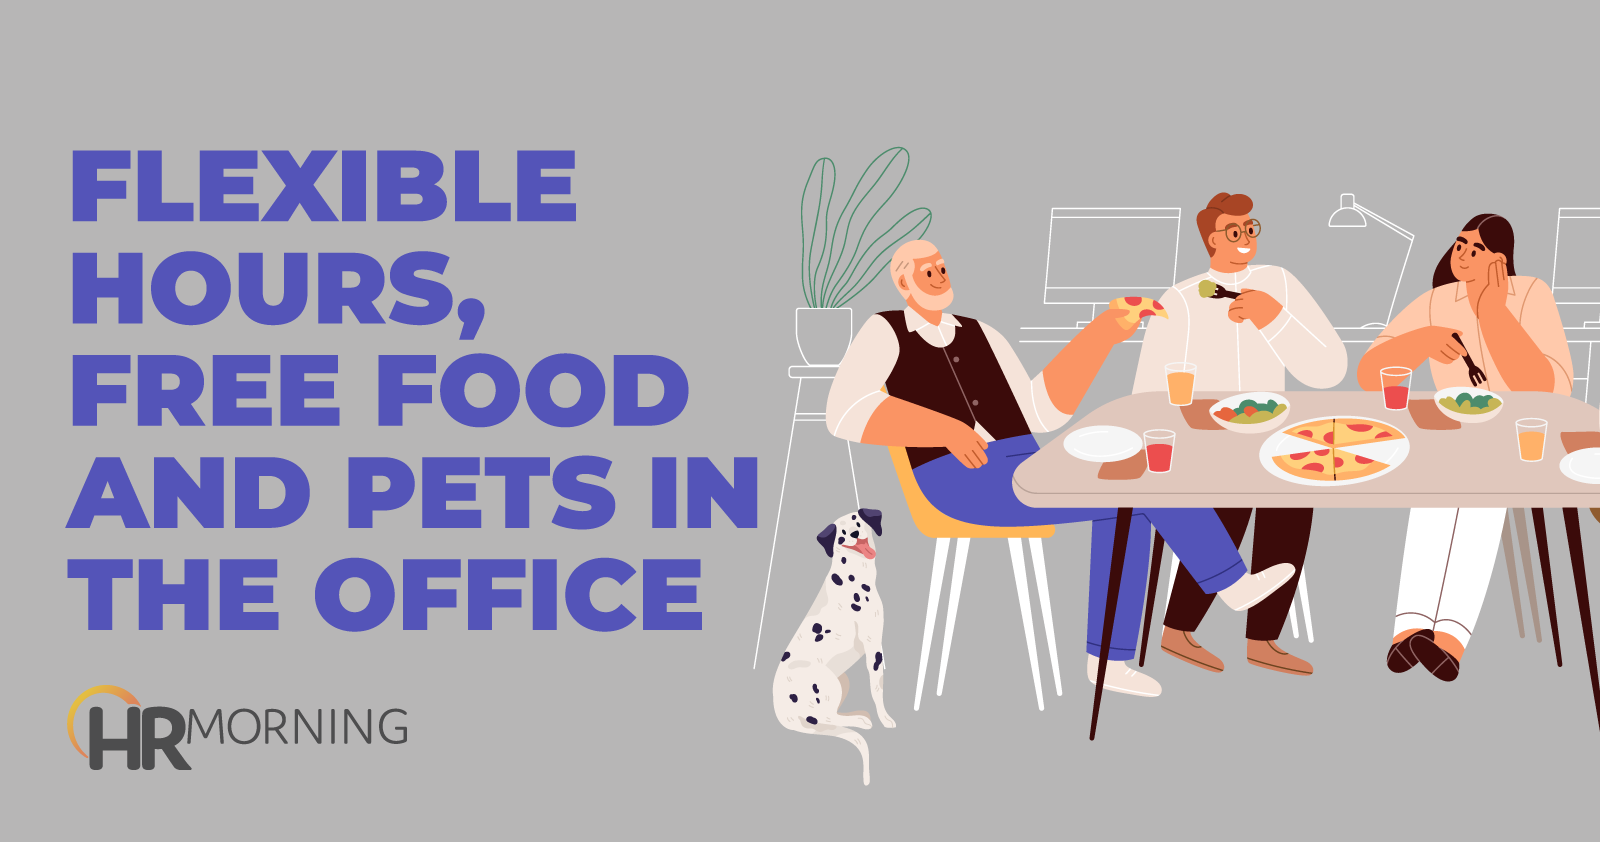 Flexible Hours Free Food And Pets In The Office